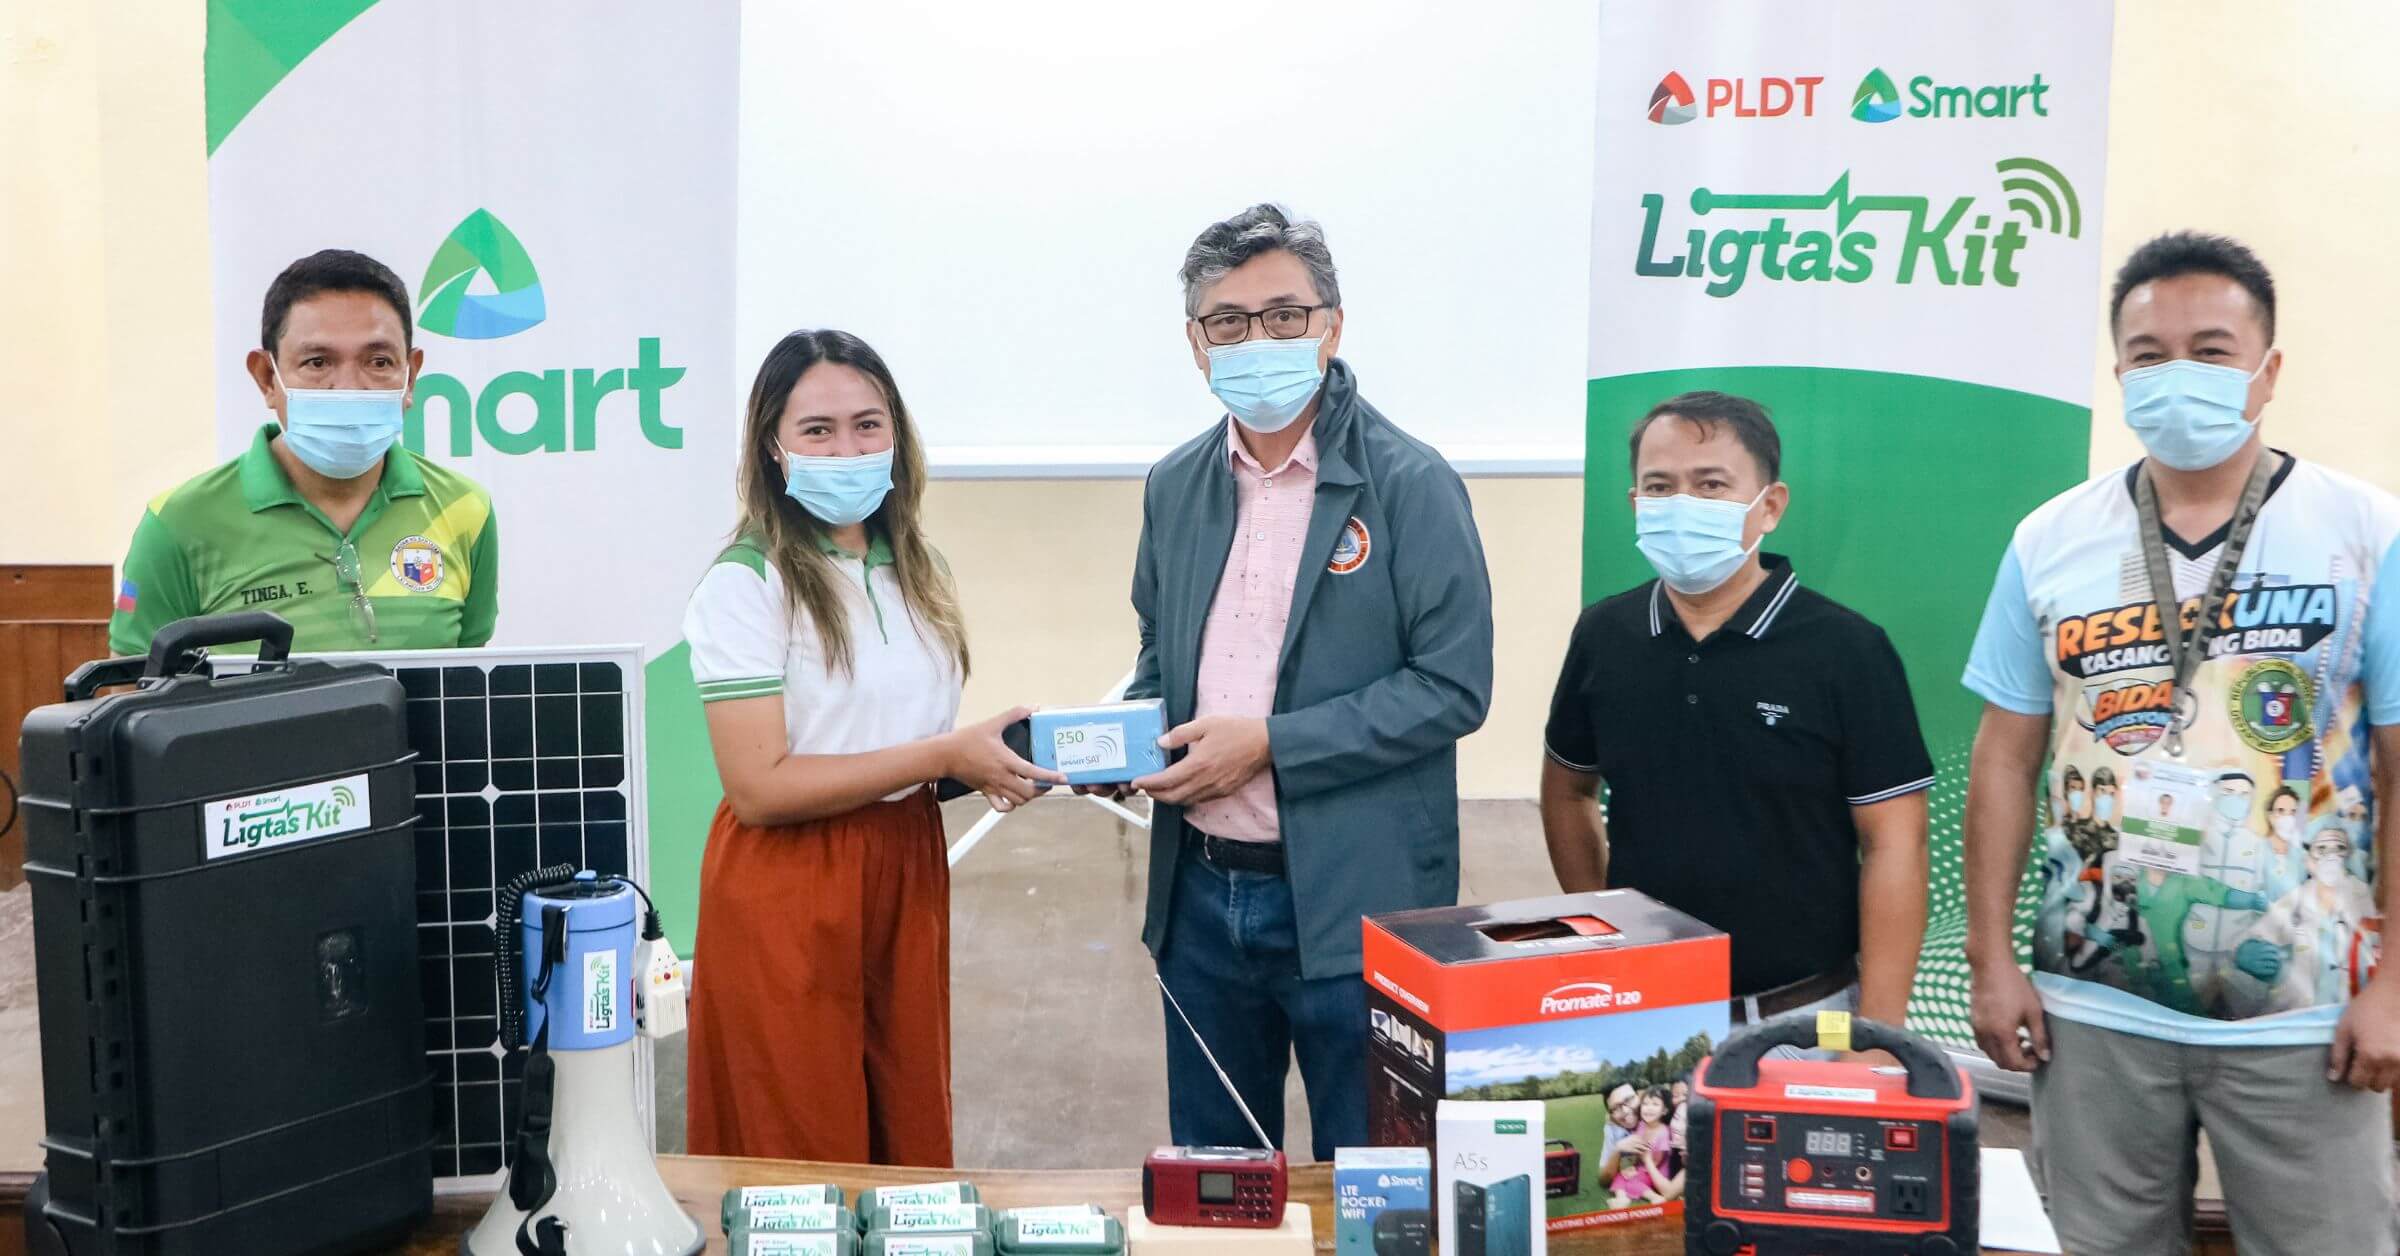 All-in-one Ligtas Kits of PLDT, Smart save lives in Bantayan Island LGUs